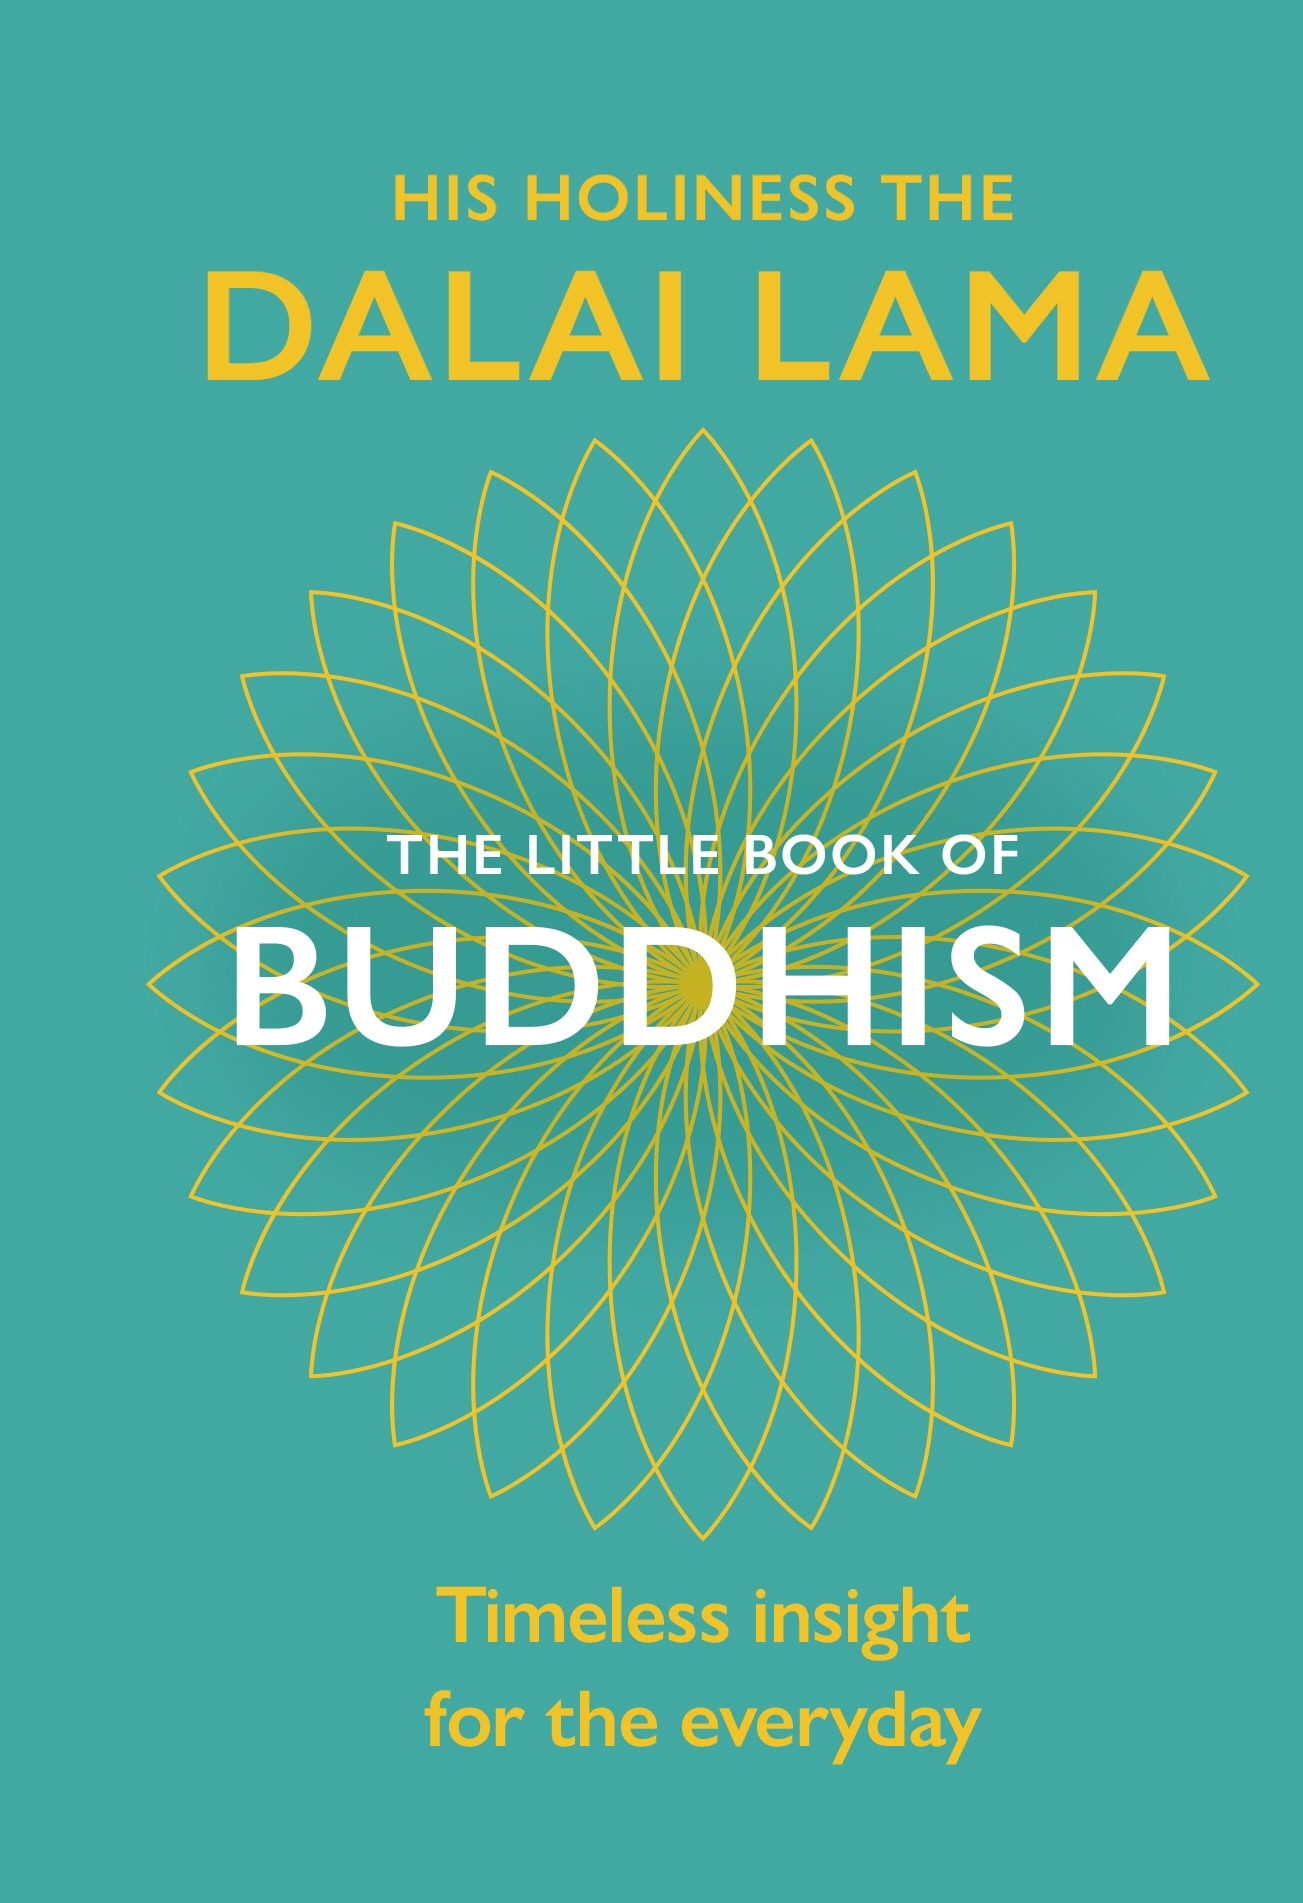 Book “The Little Book Of Buddhism” by Dalai Lama — March 7, 2019